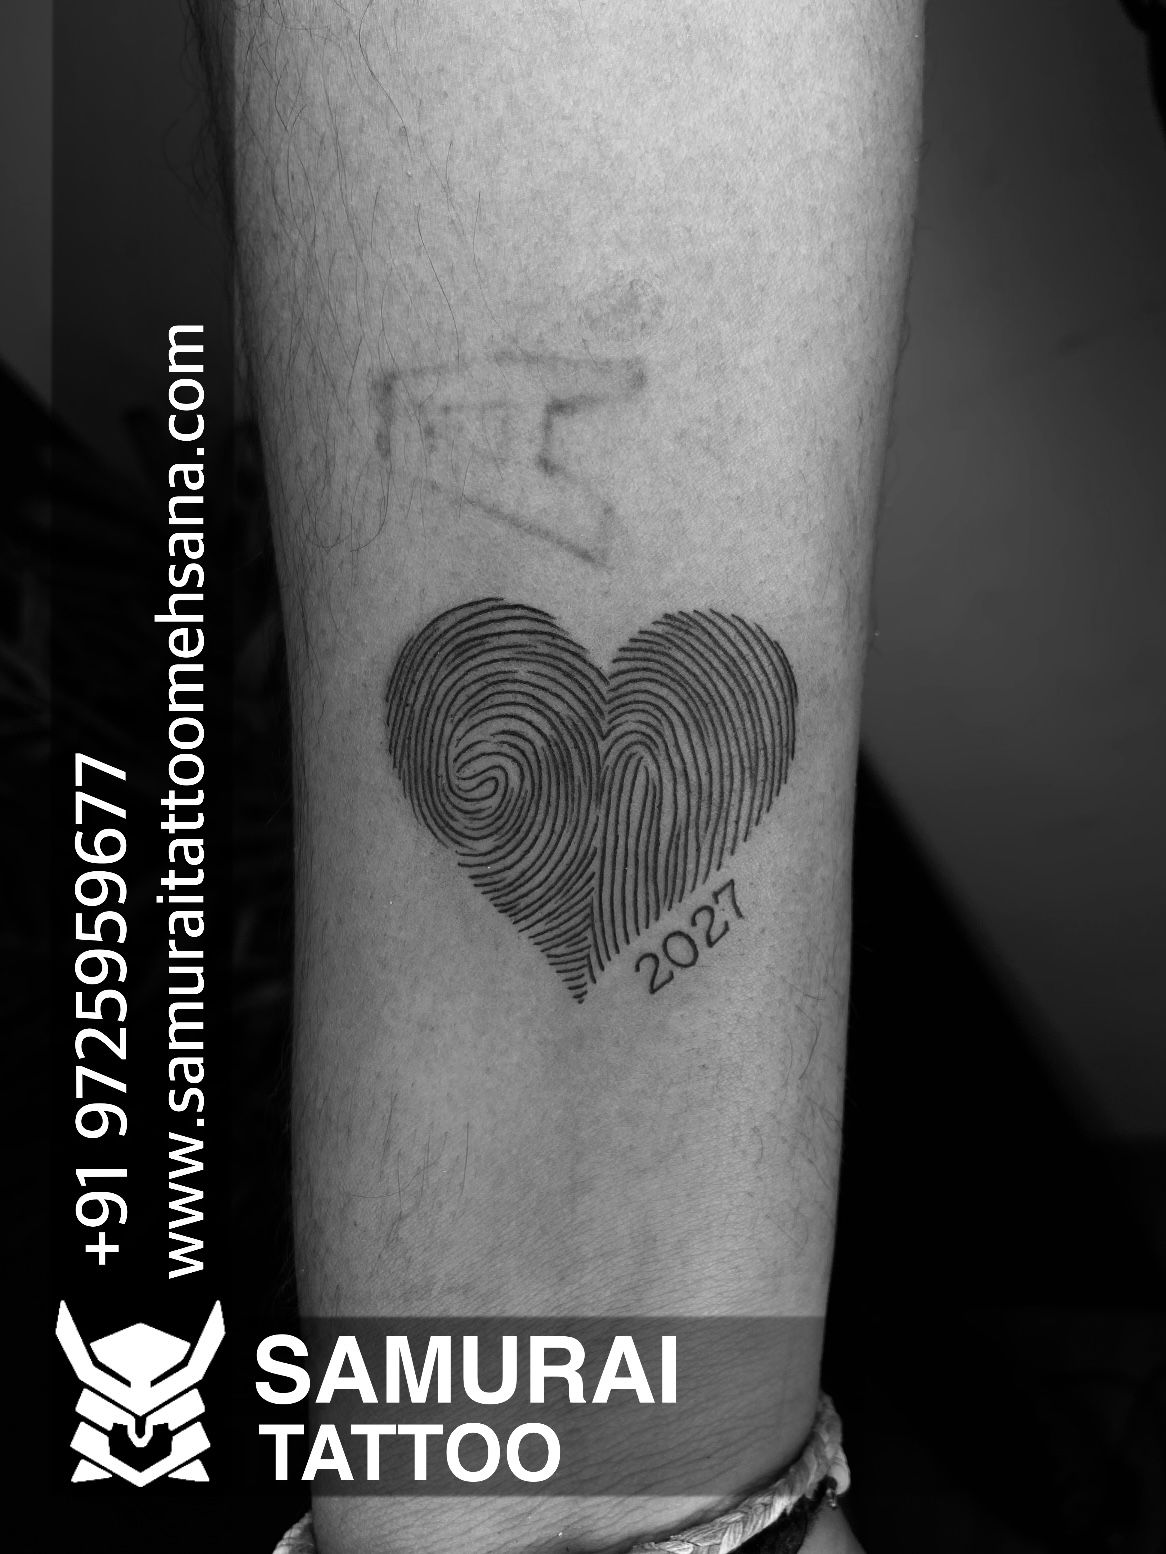 Tattoo uploaded by Ding Singh  Fingerprint Tattoos for Couples  Tattoodo